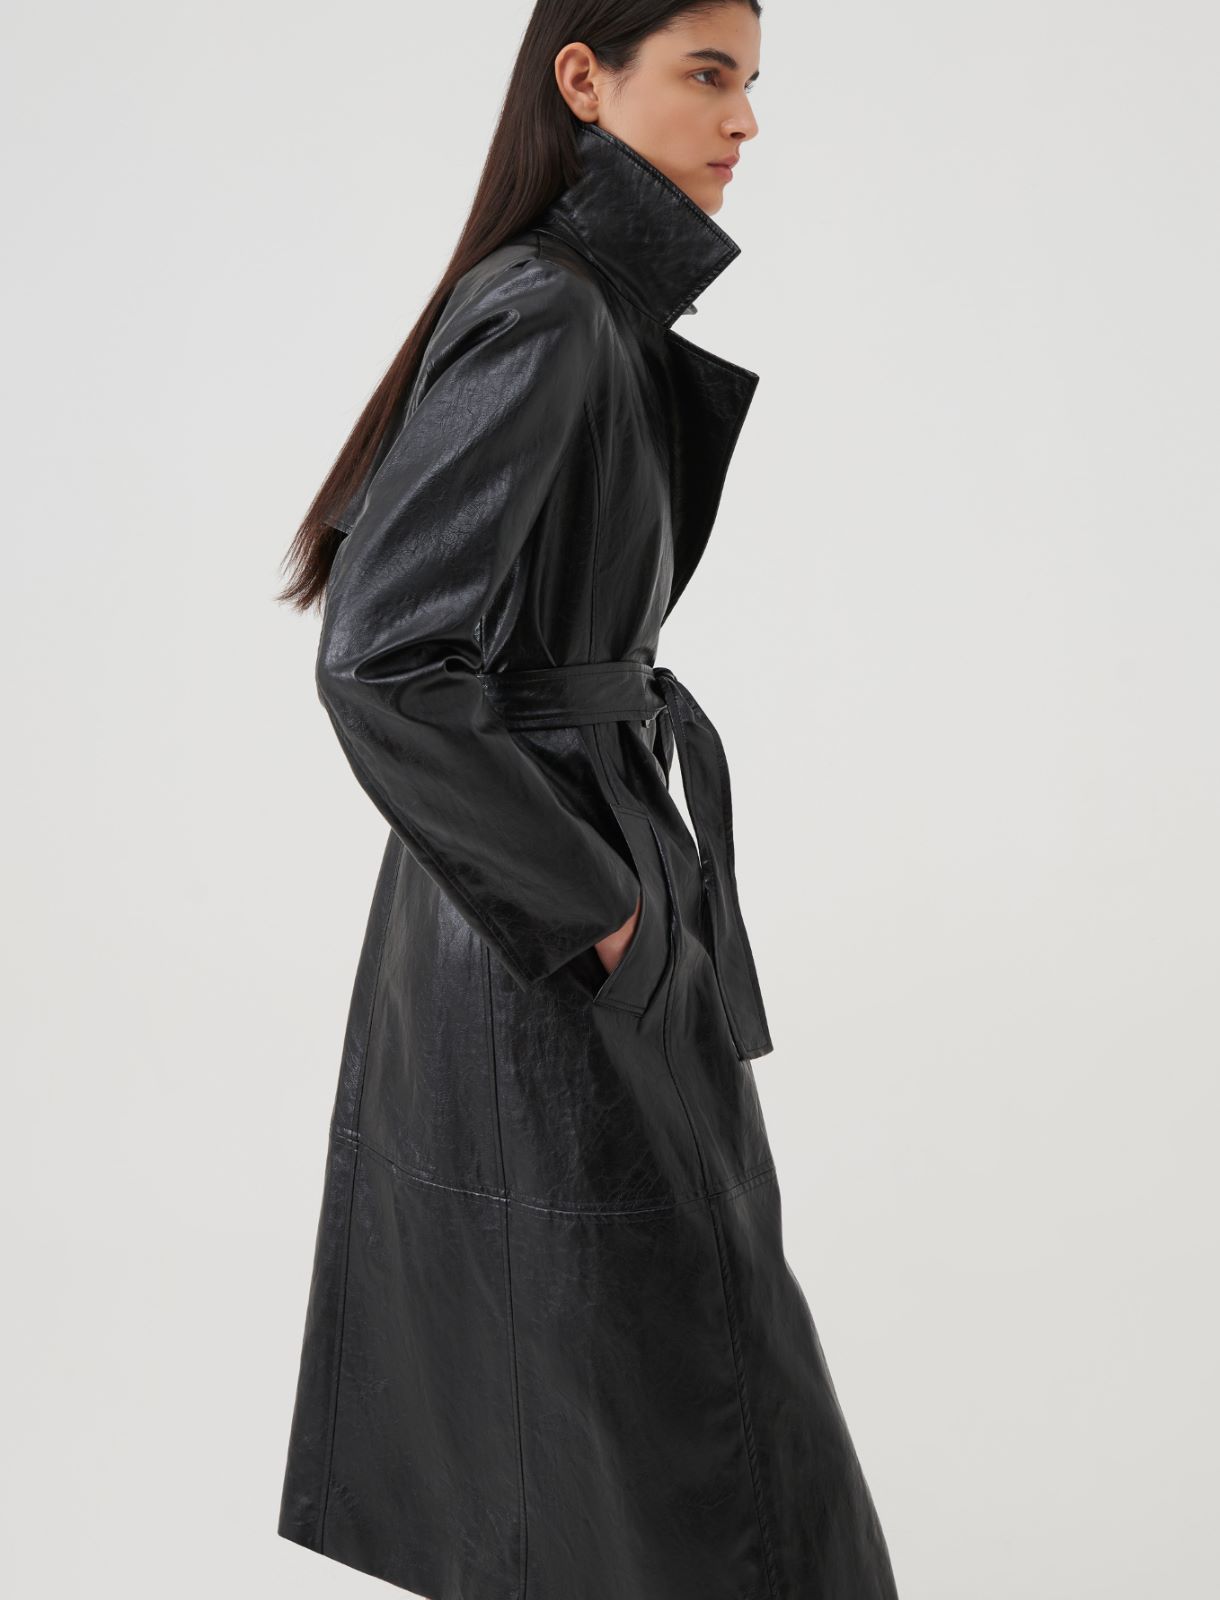 Double-breasted trench coat, black | Marella